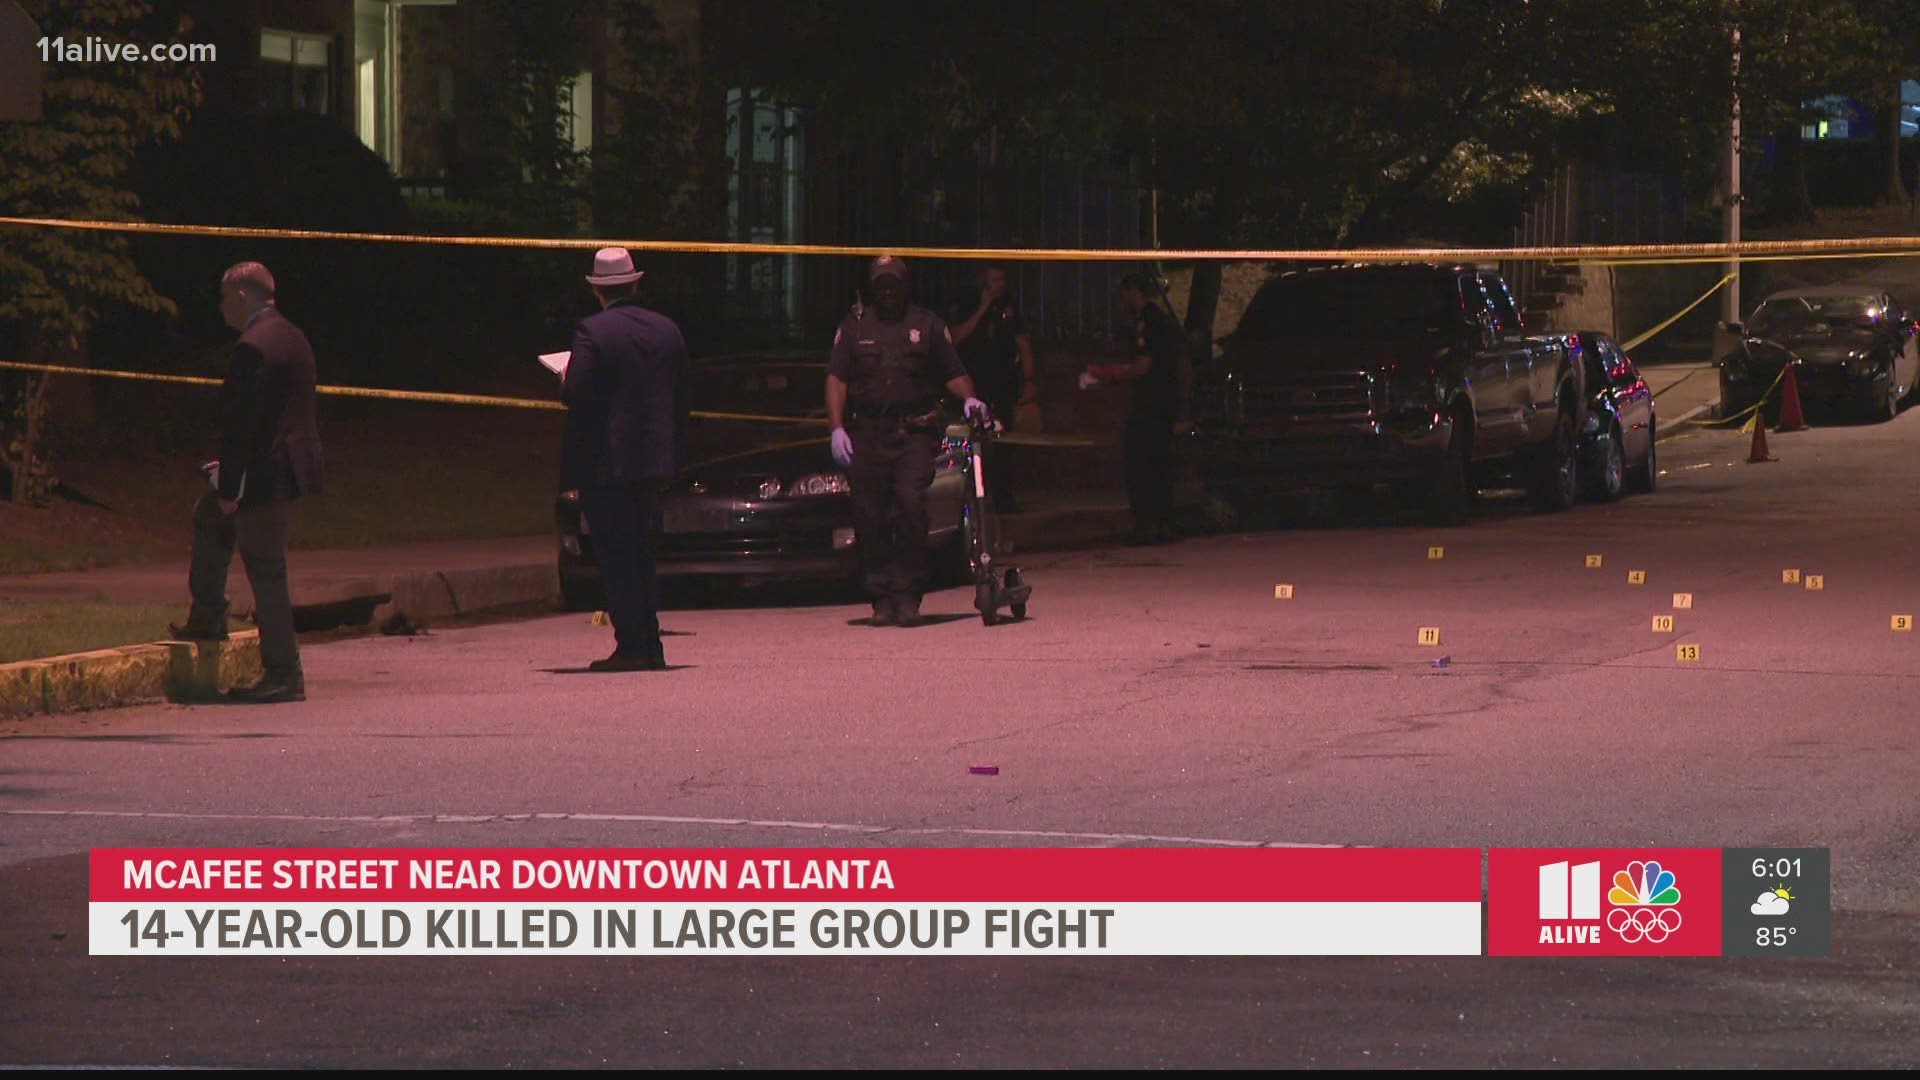 A 14-year-old was killed Saturday night in Downtown Atlanta when gunfire broke out at a brawl involving more than a dozen youths, police said.